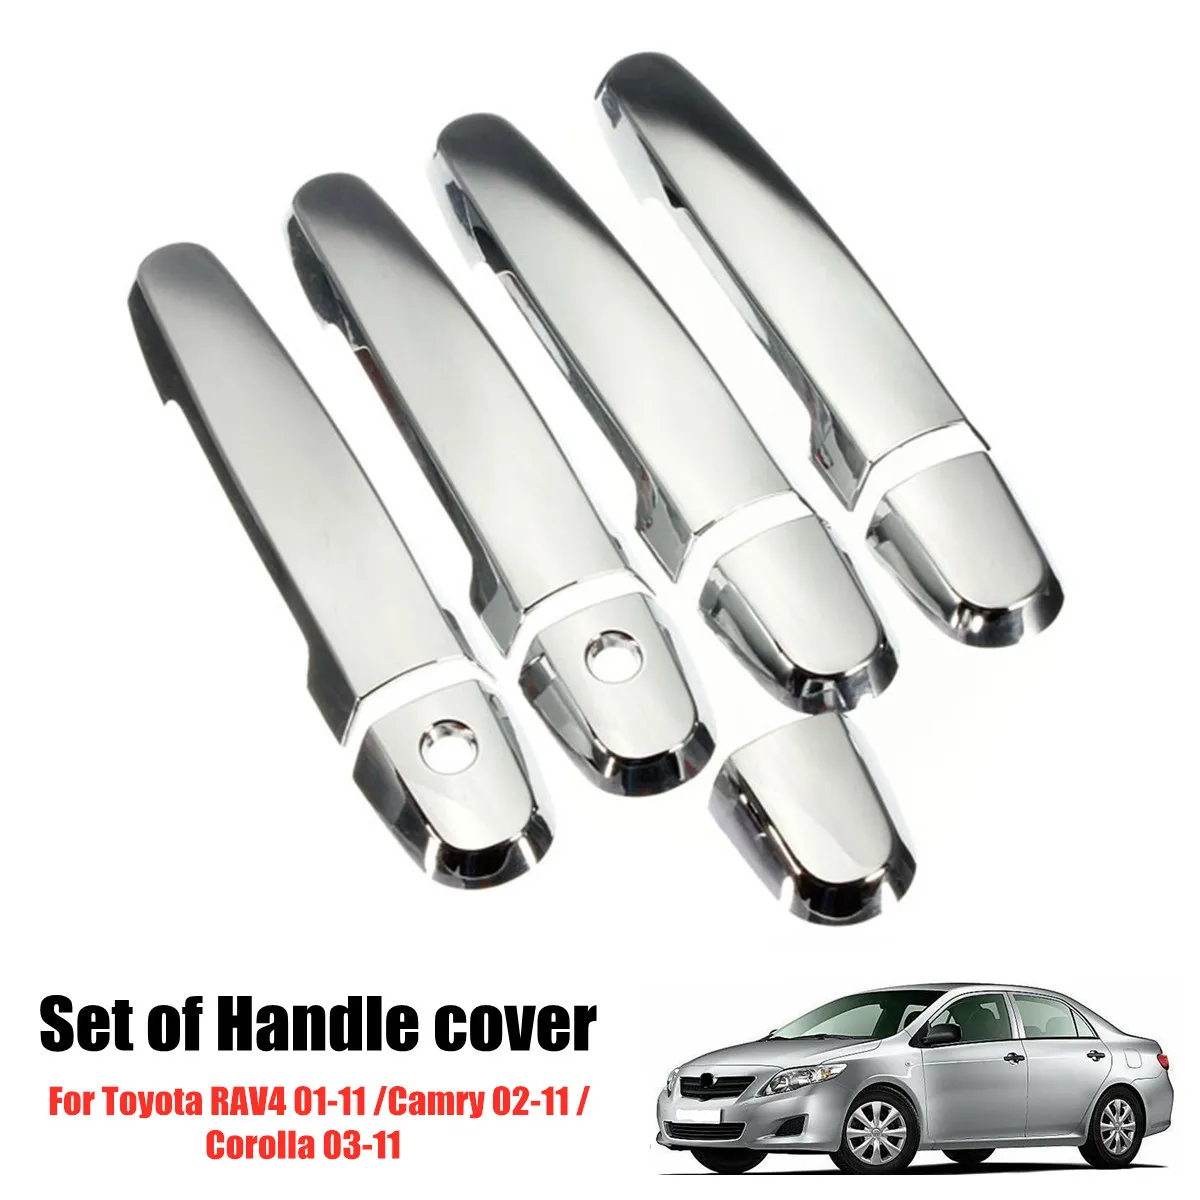 9PCS ABS Chrome Car Door Handle Covers For Toyota Camry for RAV4 for Toyota Yaris for Corolla 2003-2011 Car Exterior Parts